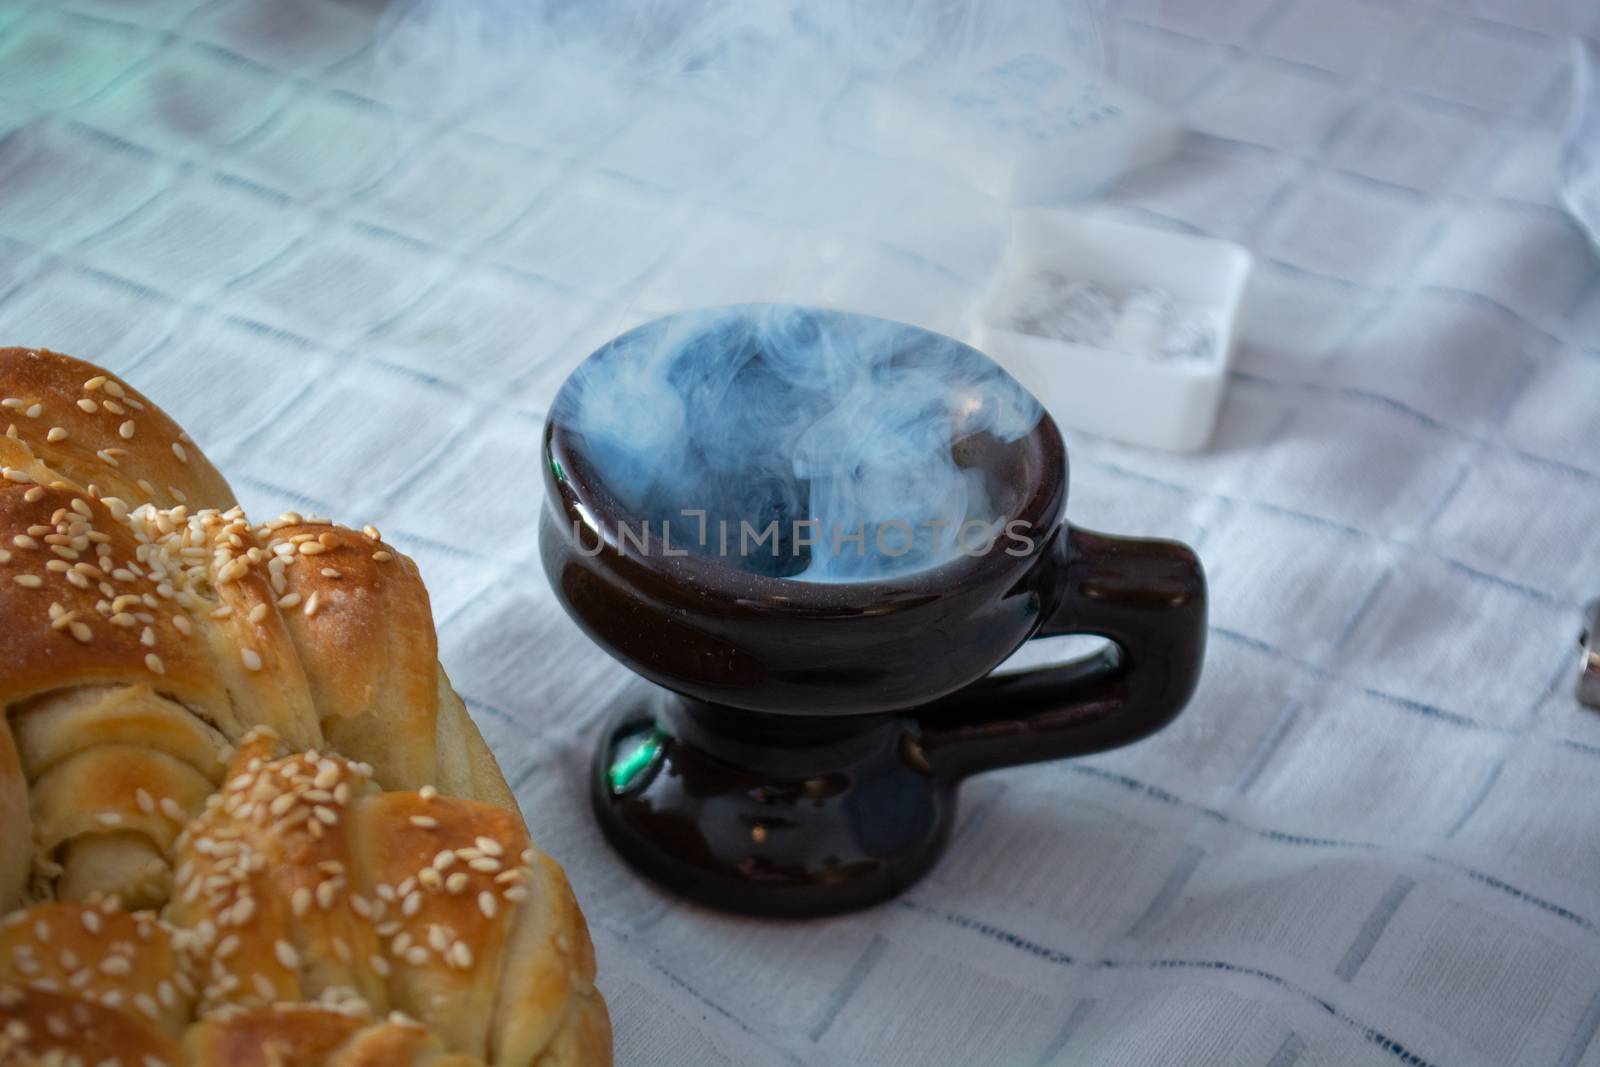 Smoke rising from Cresset on the table with food on ortodox easter